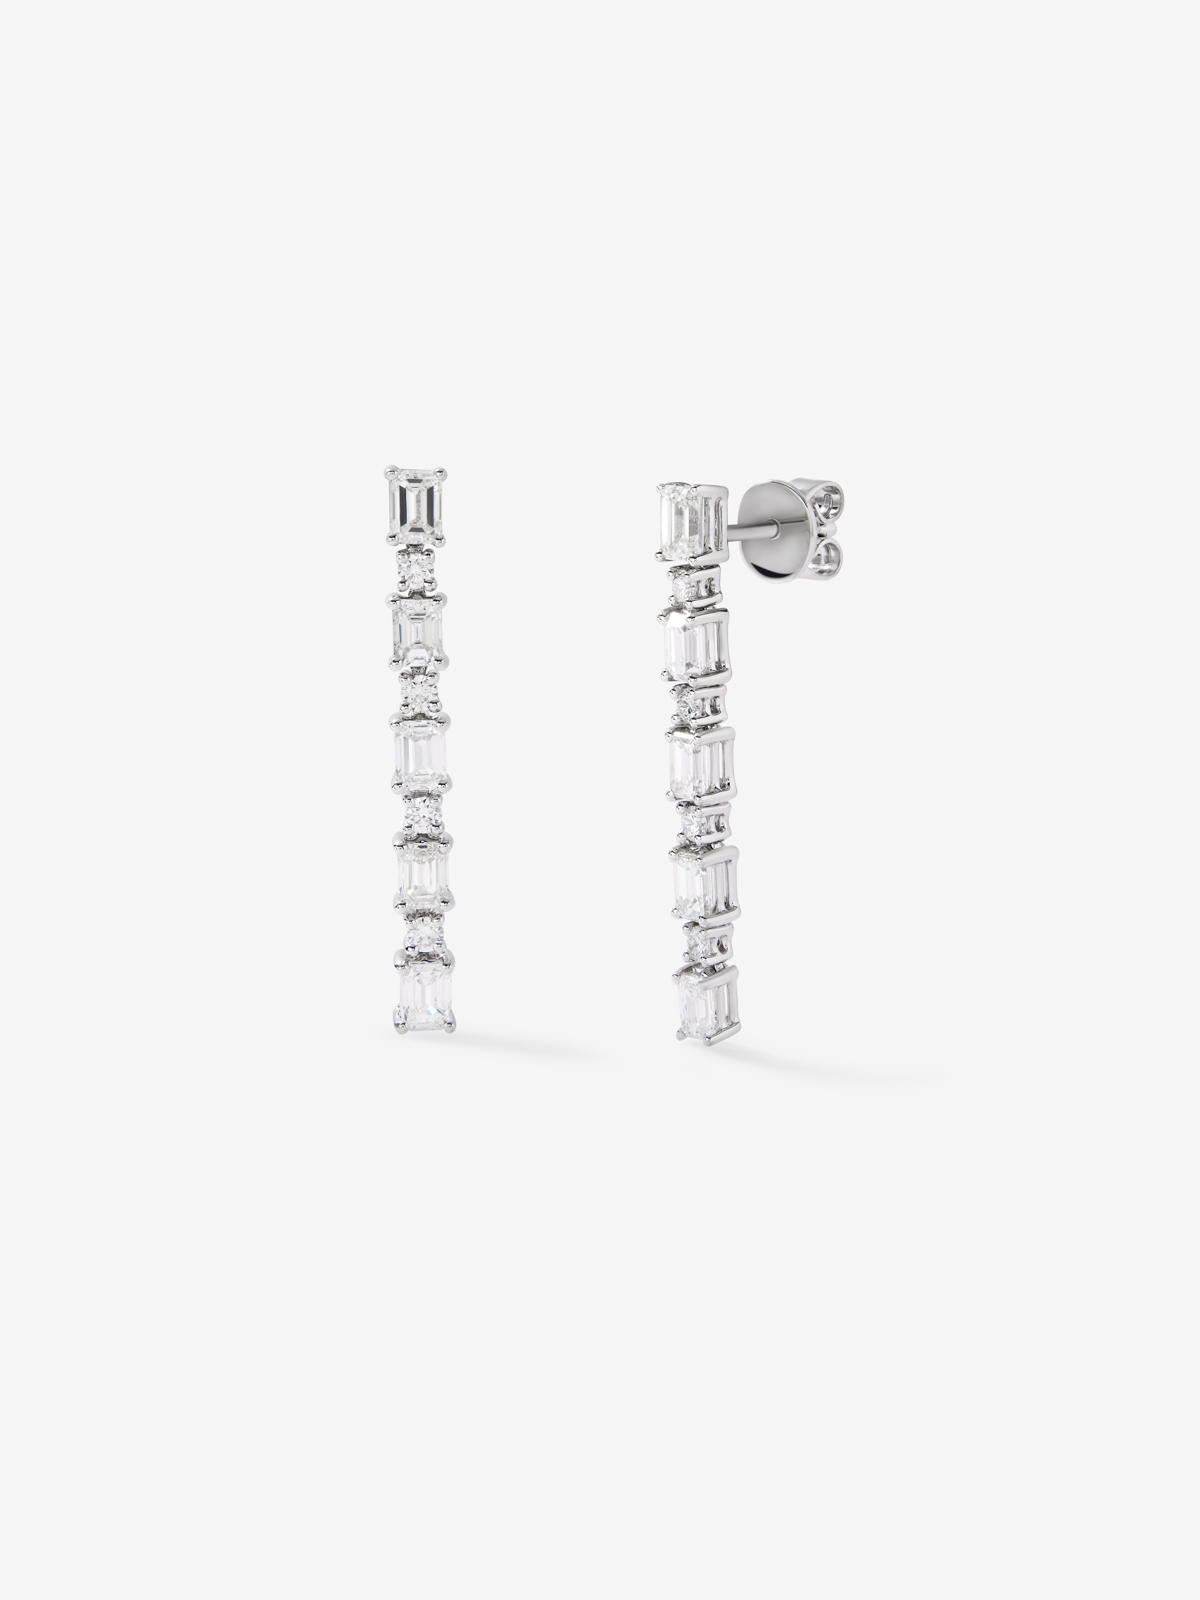 18K white gold earrings with white diamonds in emerald size 2.13 cts and diamonds in bright size of 0.26 cts